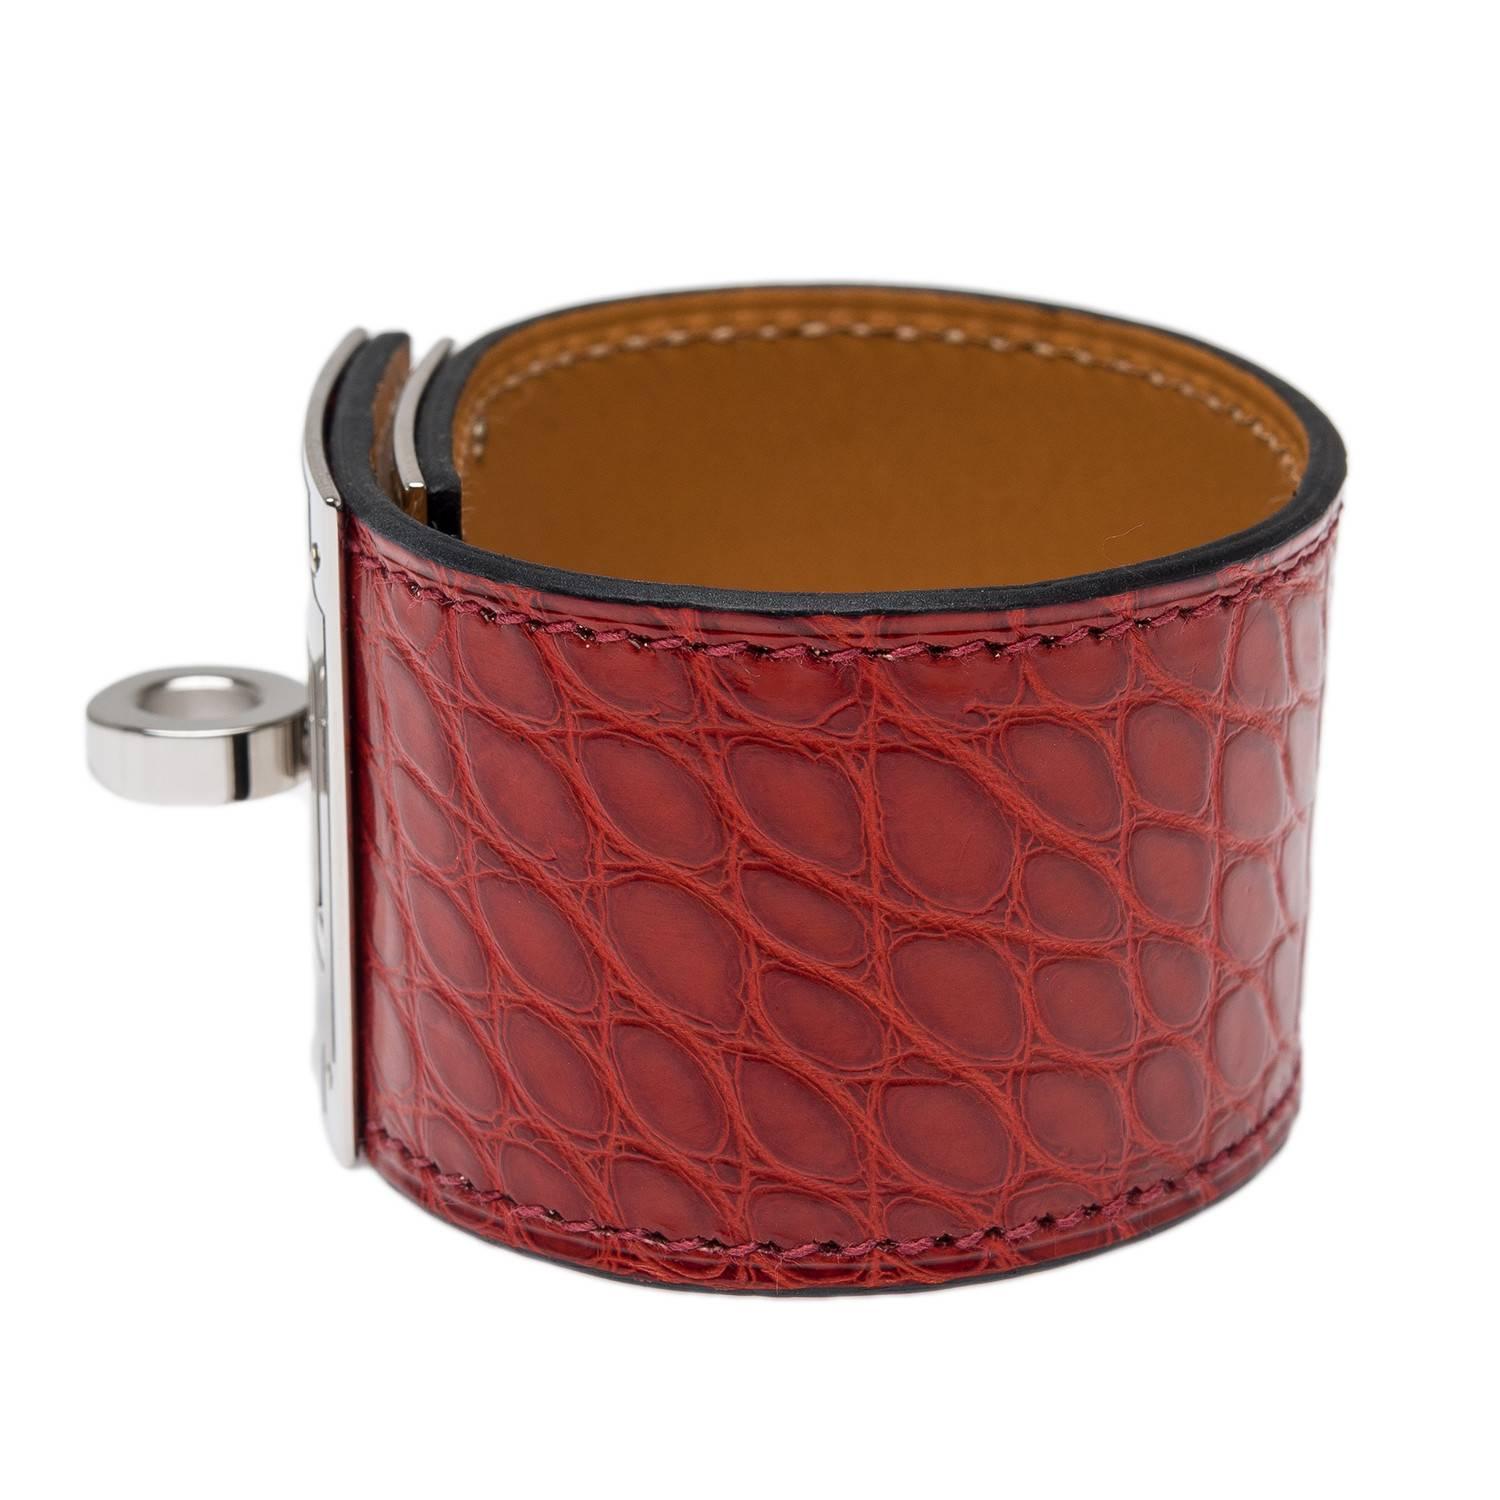 Hermes Kelly Dog Bracelet in Red alligator leather.

This bracelet features tonal stitching with palladium hardware and toggle closure.

Origin: France

Condition: Pristine; never worn

Accompanied by: Hermes box, dustbag and ribbon

Measurements: